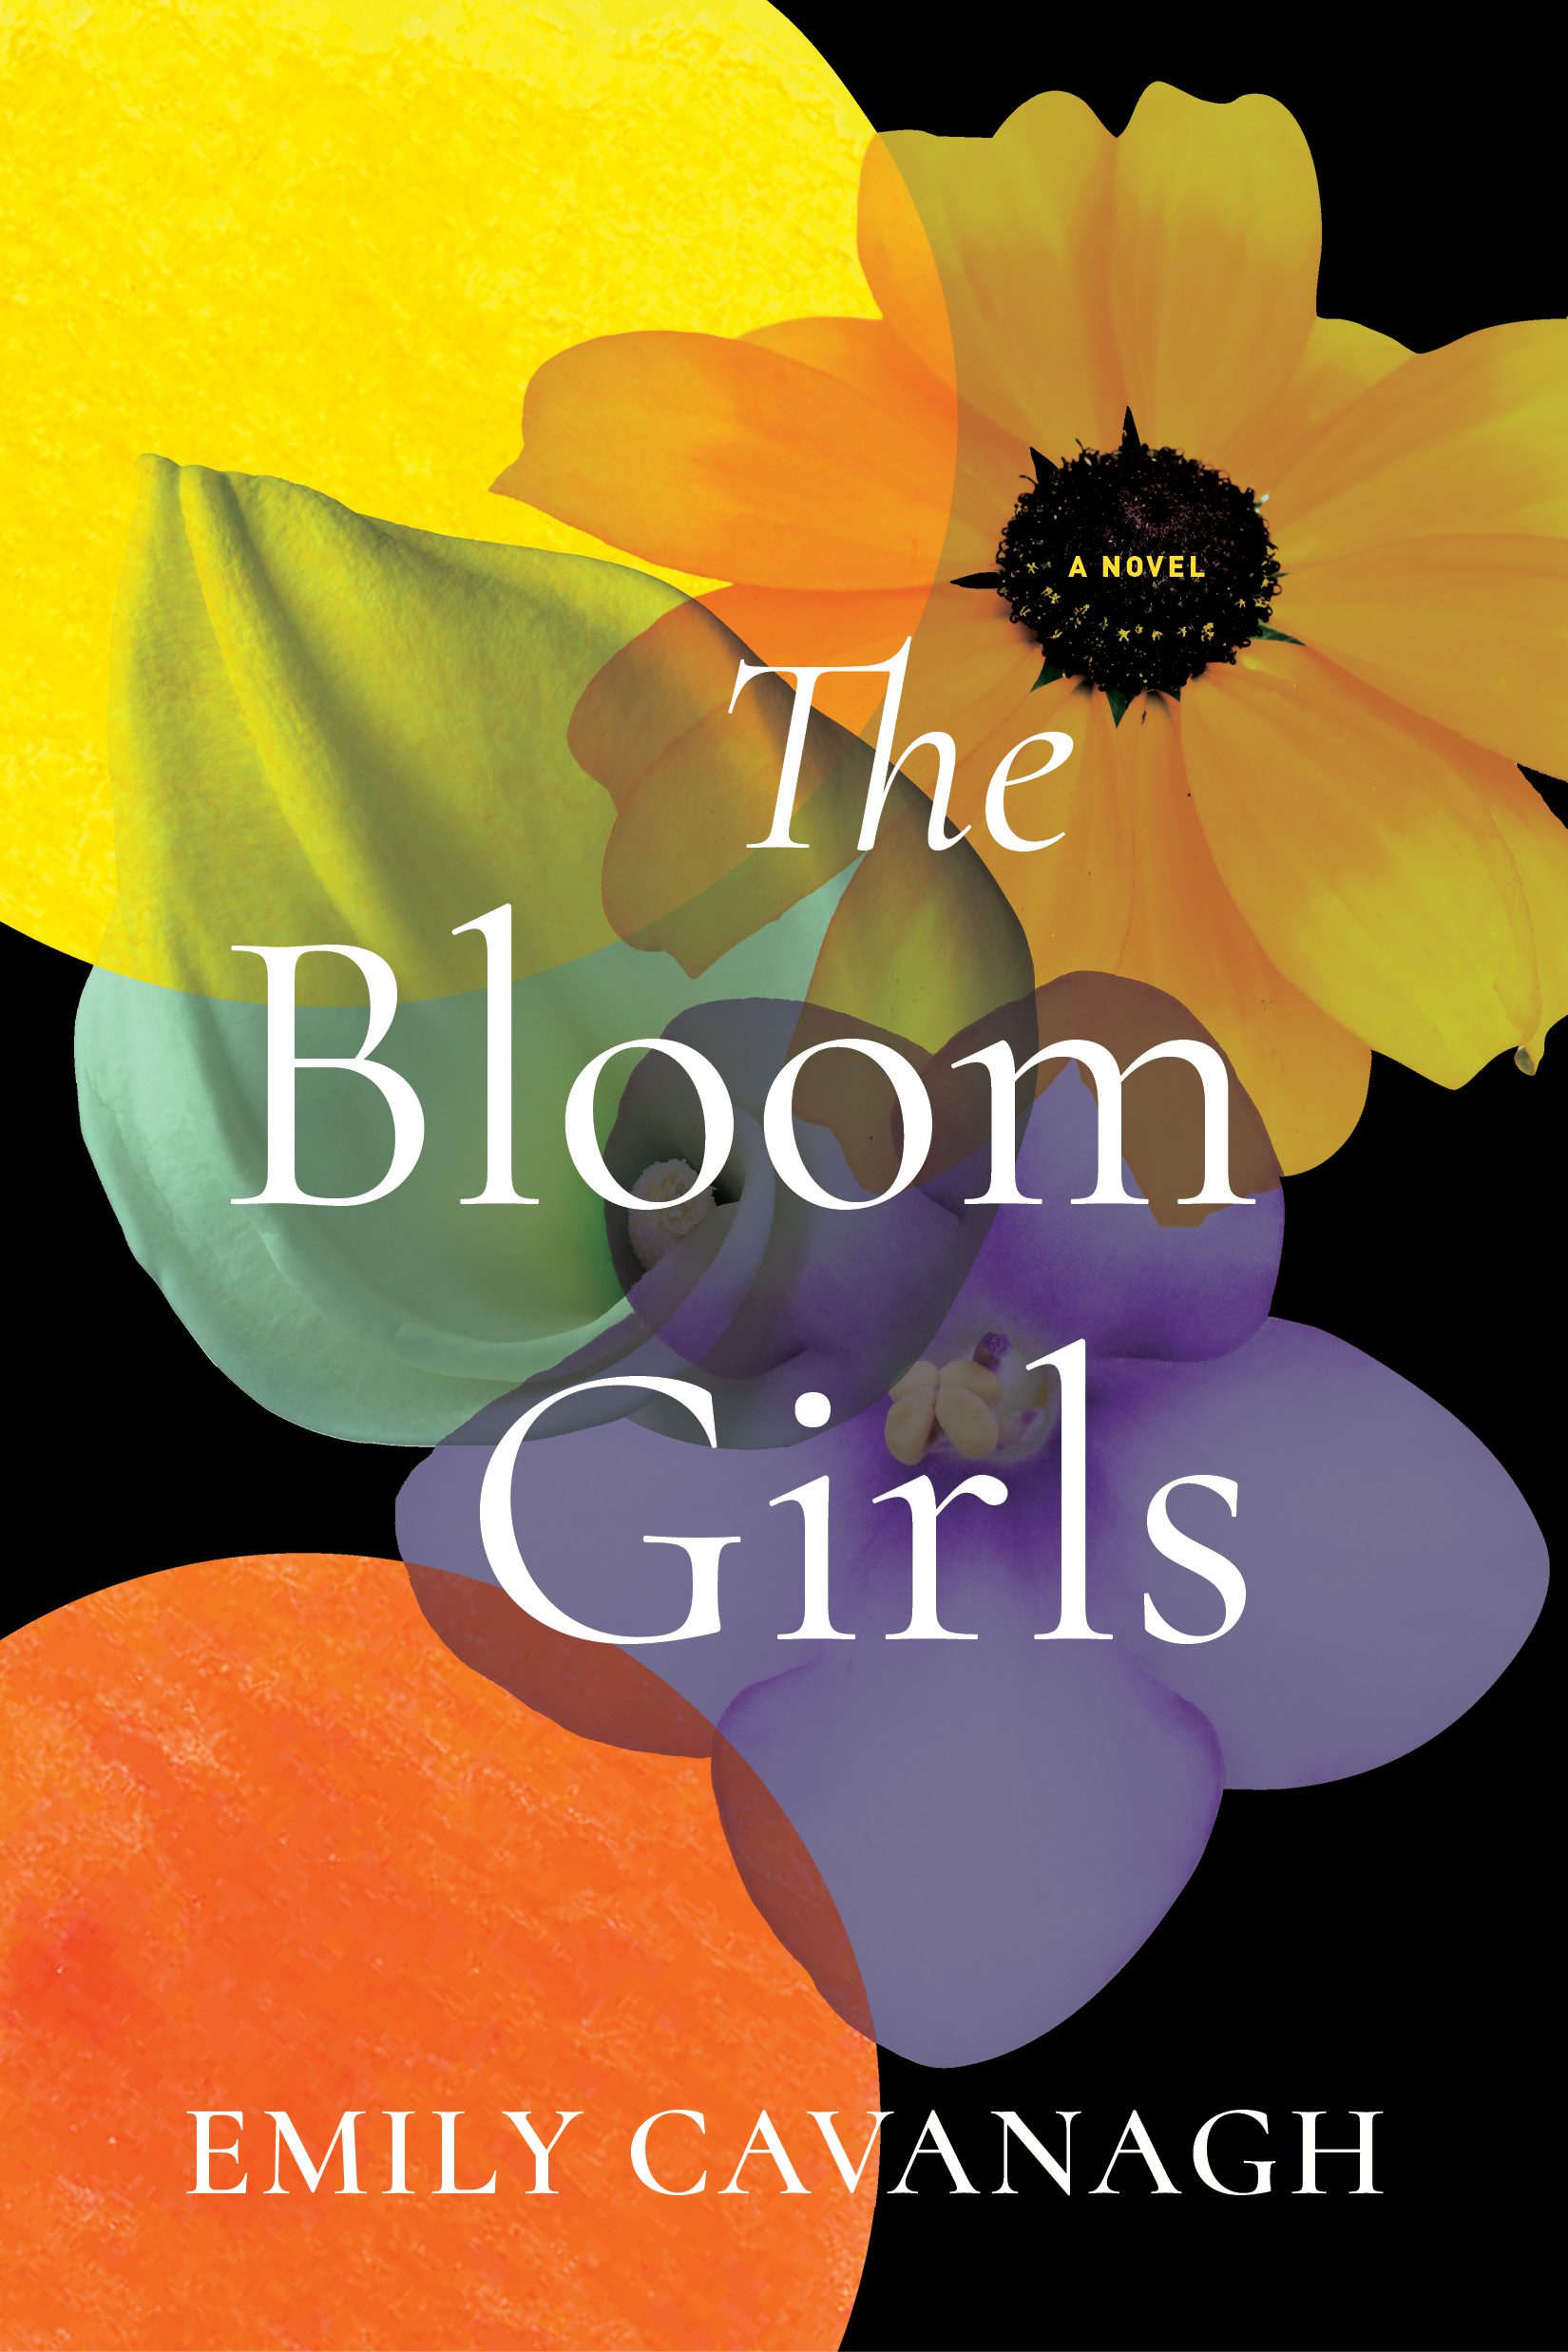 Interview With Emily Cavanagh – THE BLOOM GIRLS